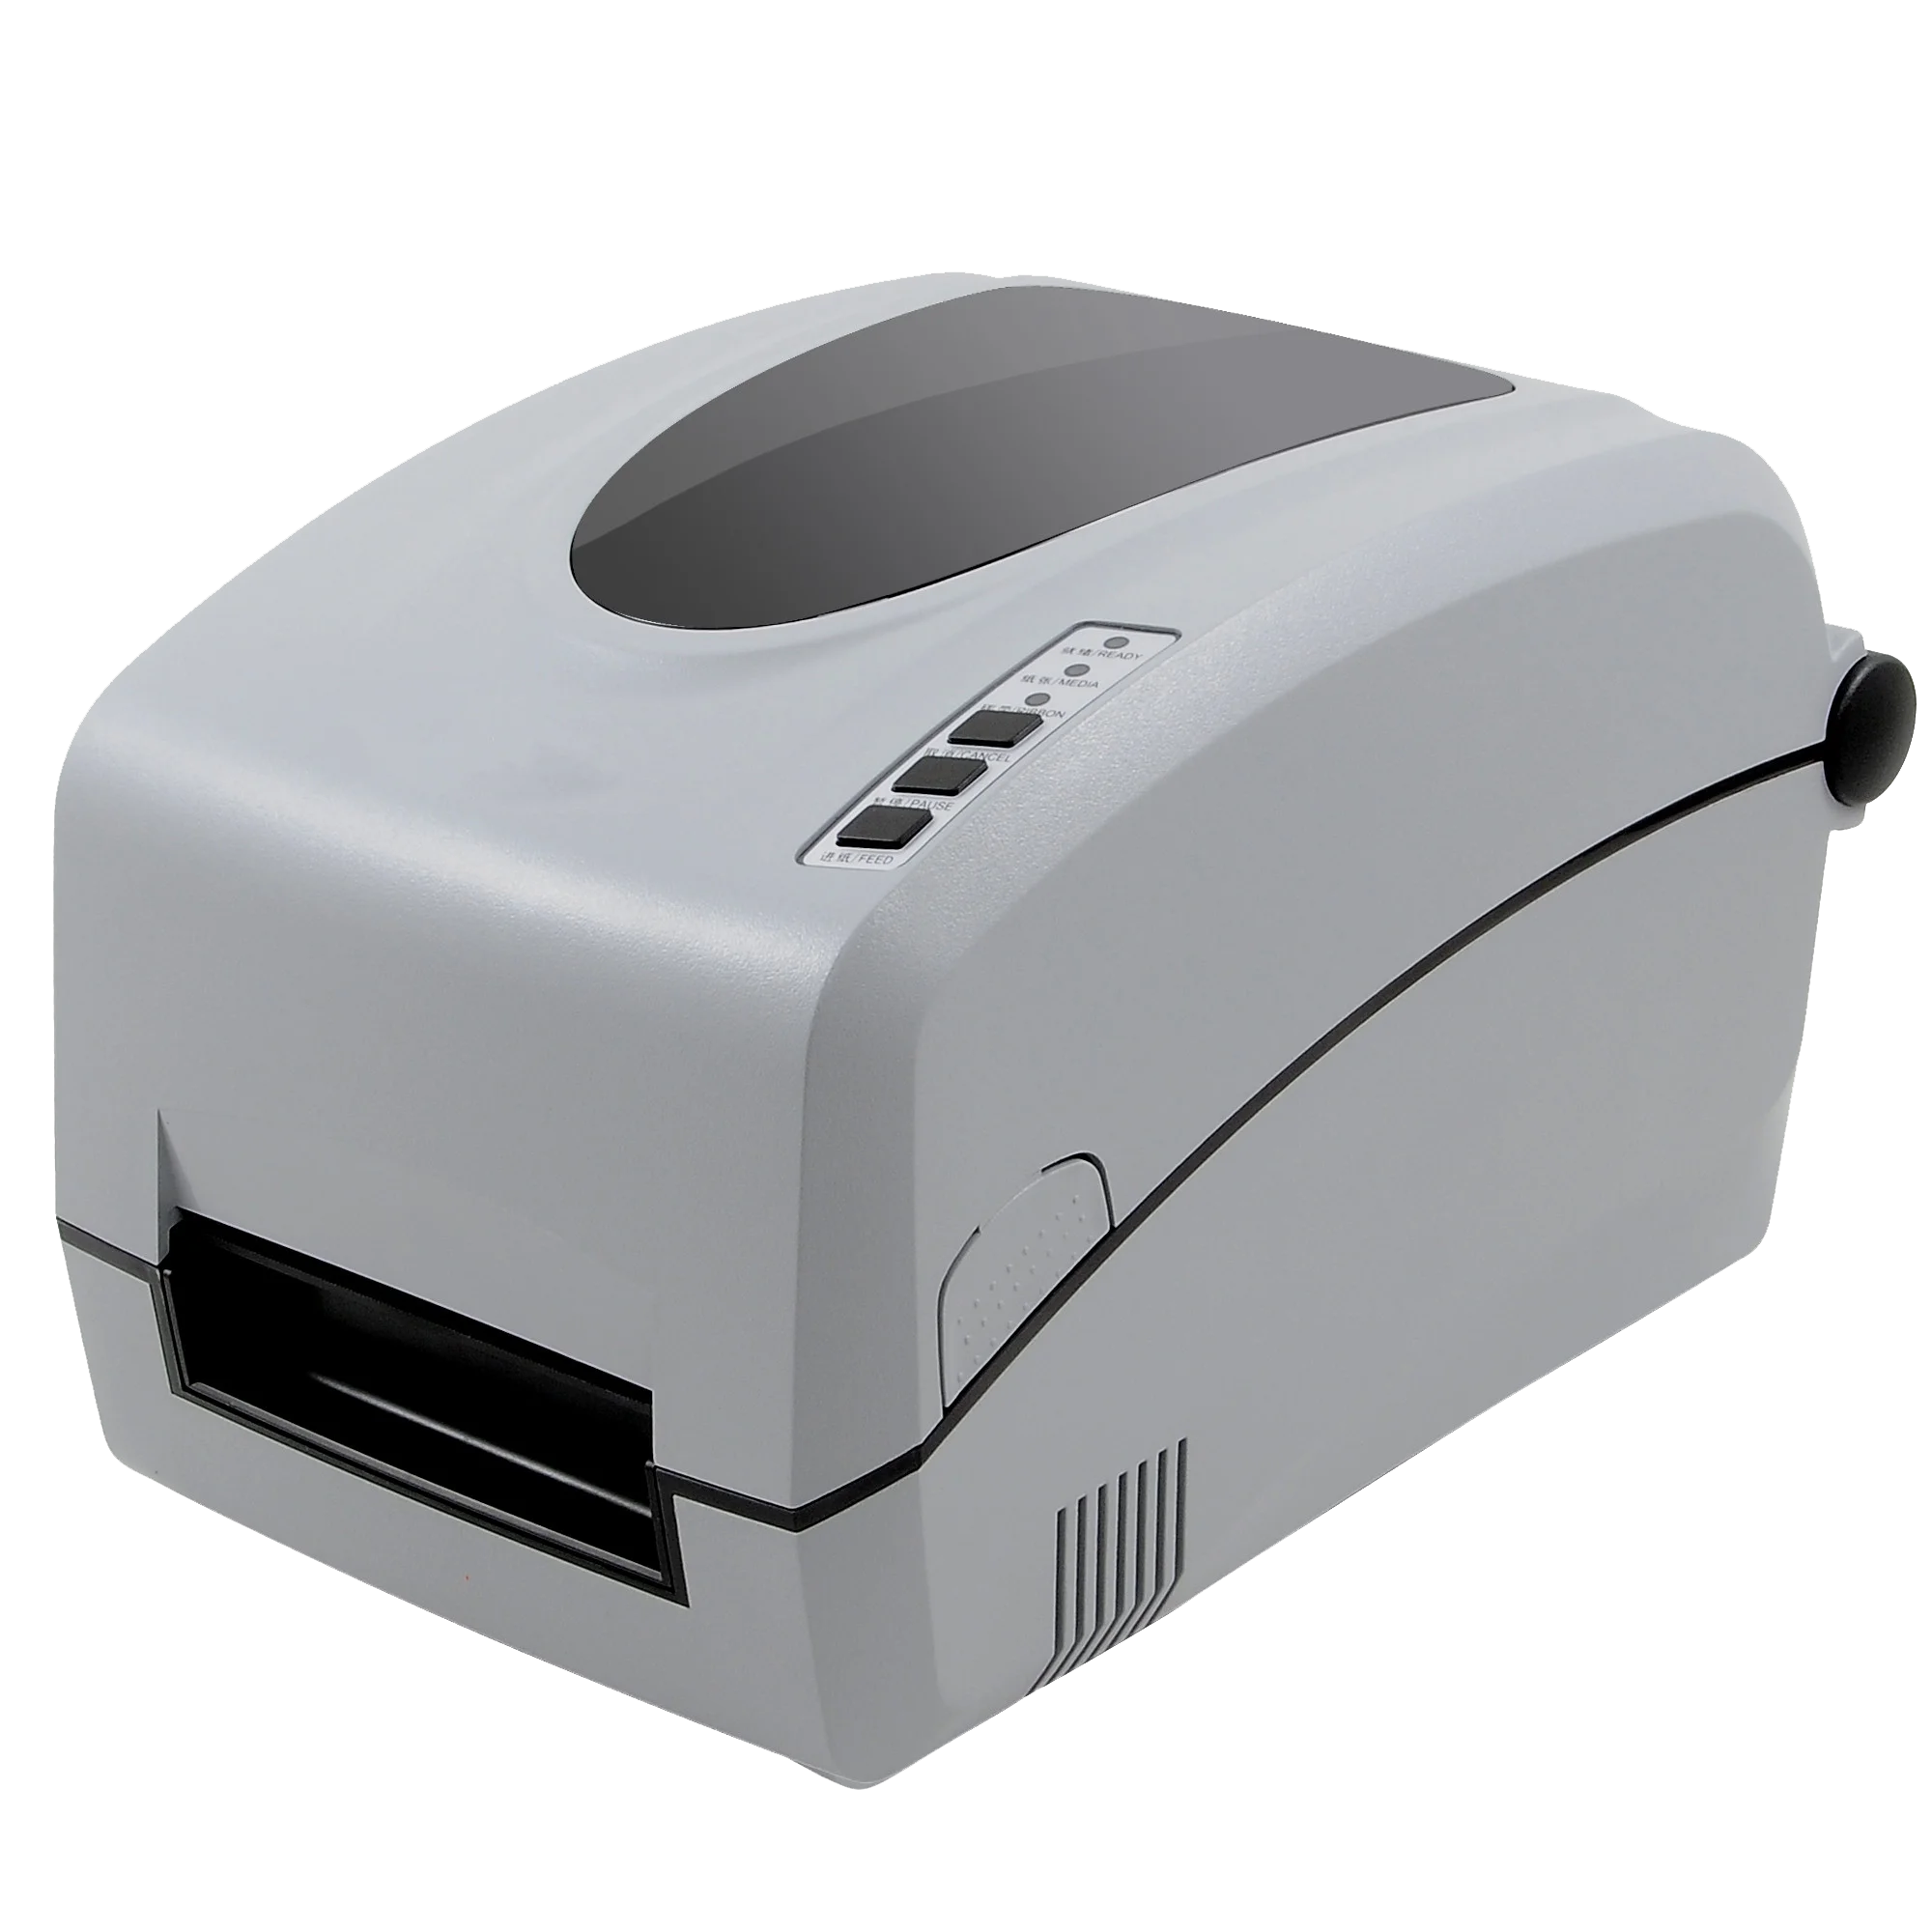 Anoi Borgmester smag desktop rfid printer with office smart management with uhf tag nfc tag id  maker machine